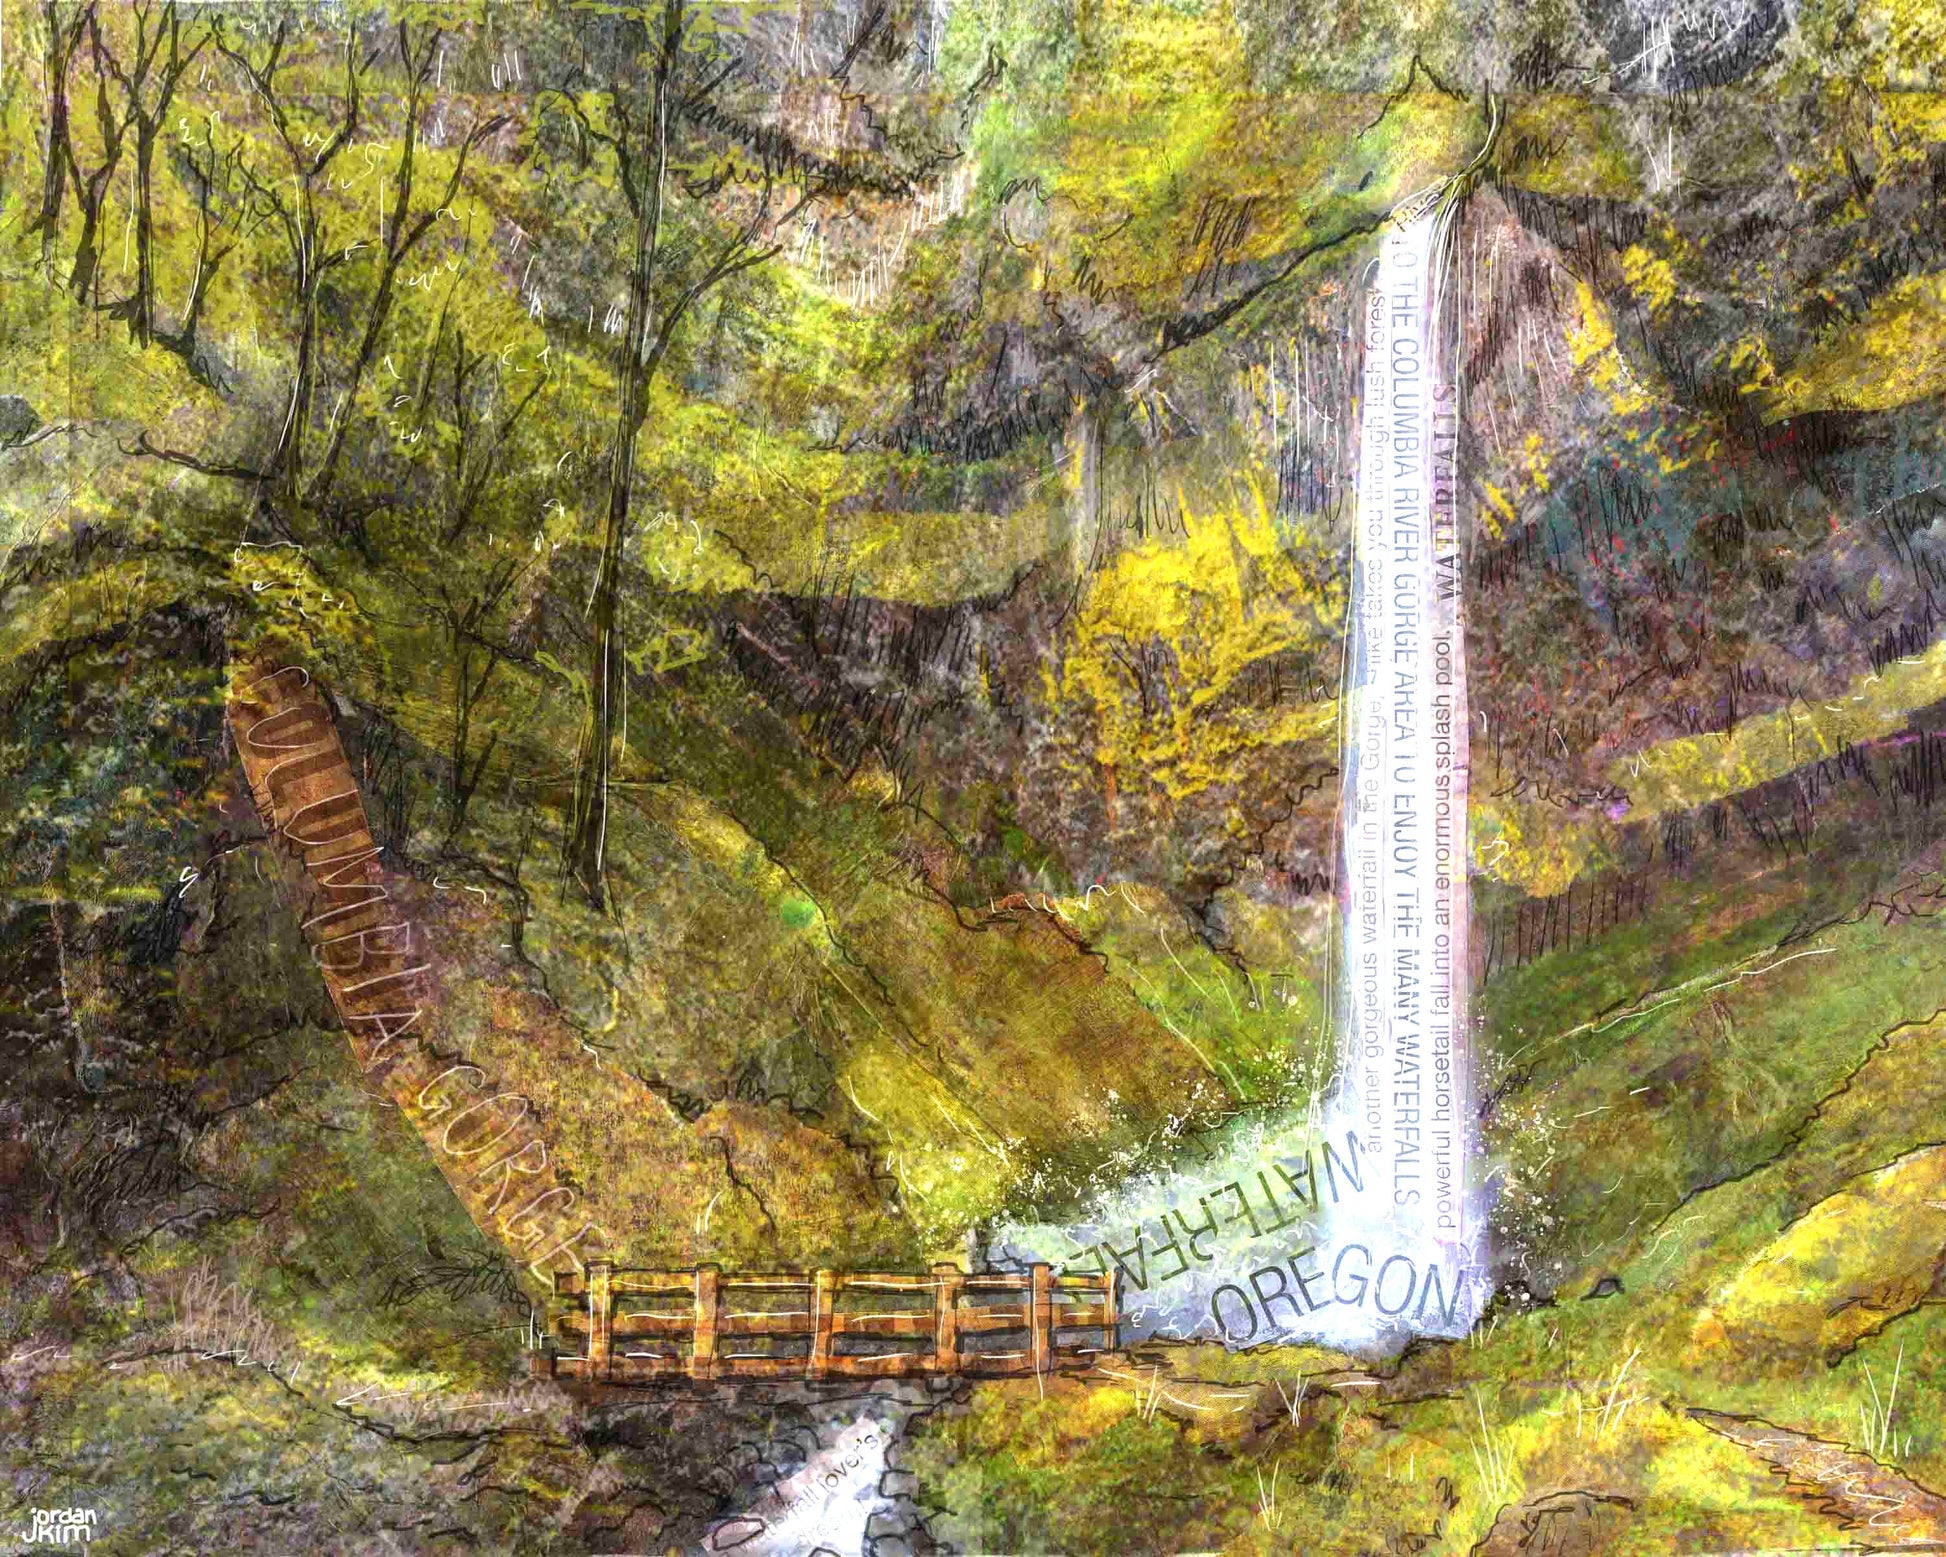 8x10 Art print of a Paper Collage of Wahclella Falls in the Columbia River Gorge - Landscape Wall Art